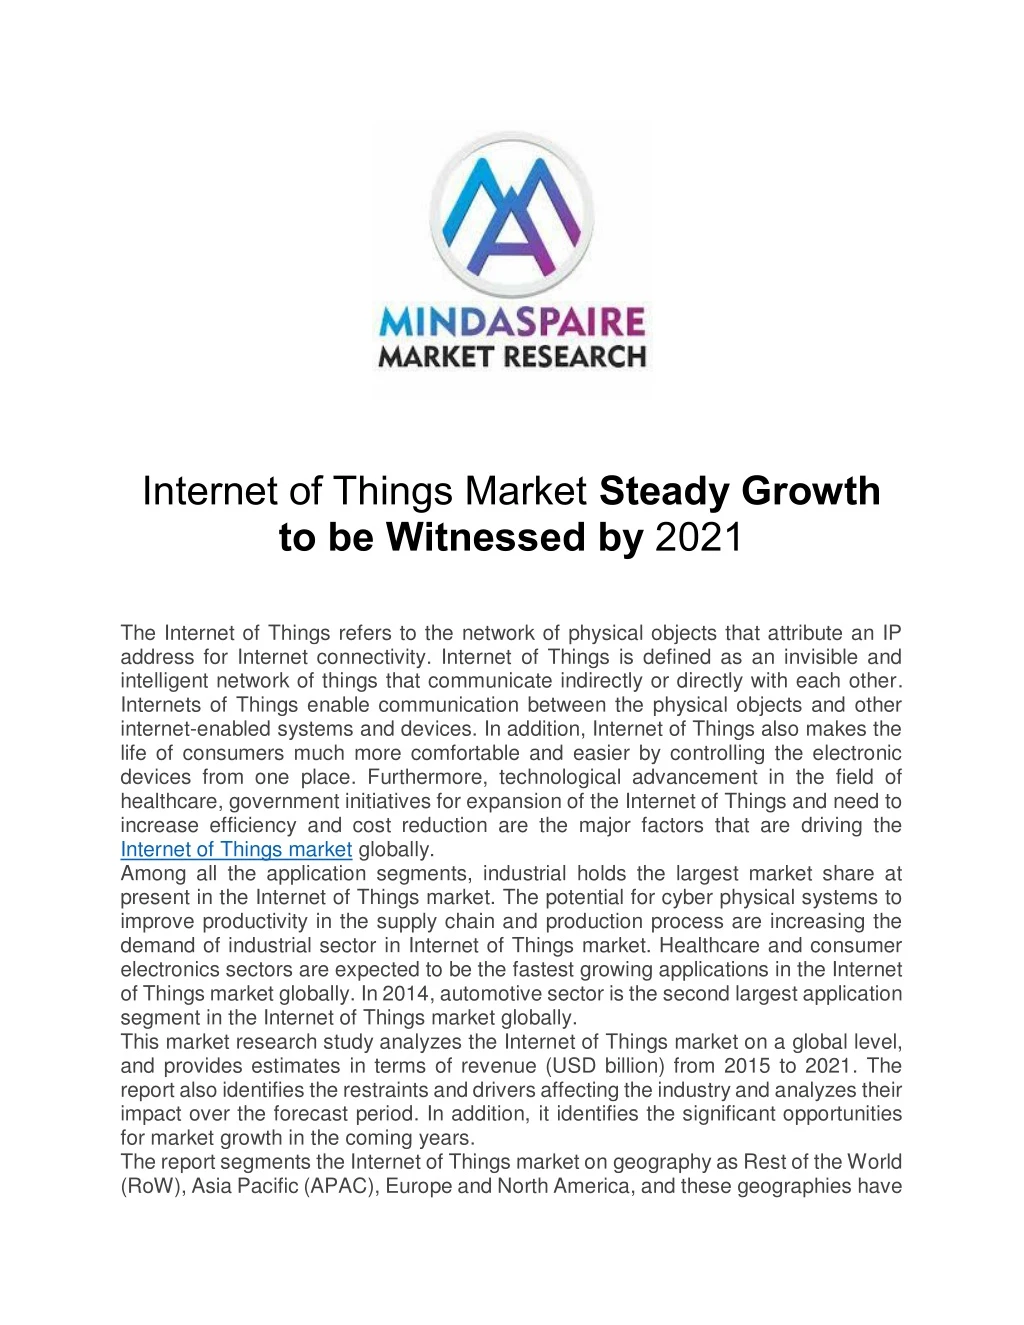 internet of things market steady growth